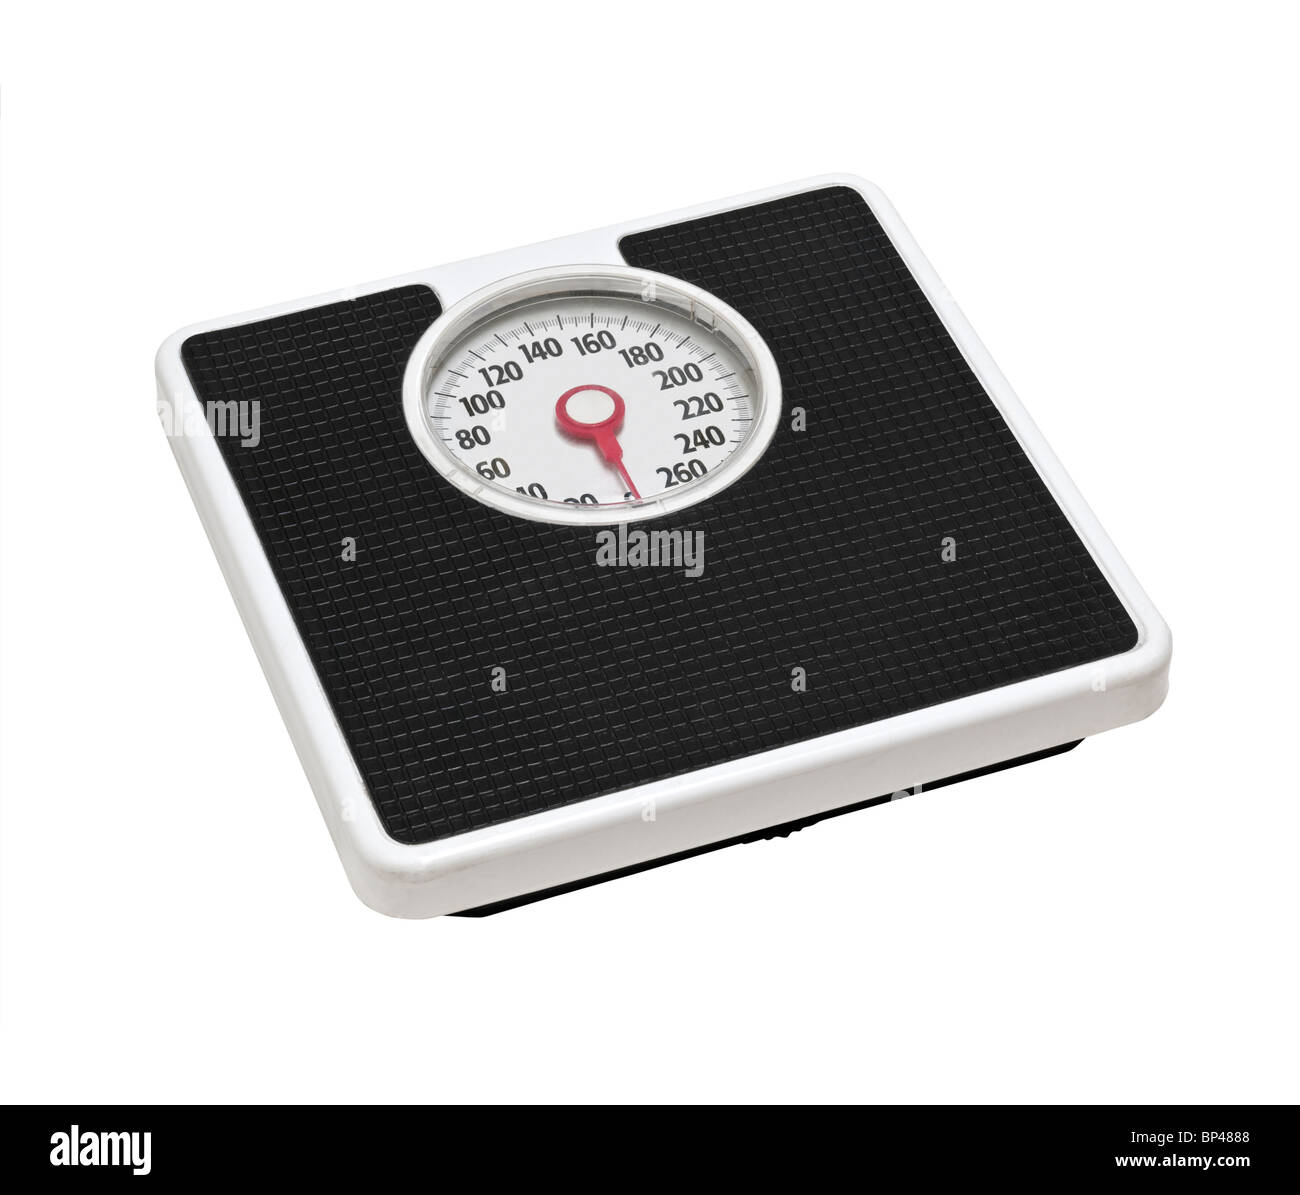 Weight Scale With Wholesome Slice Of Bread And Measuring Tape On White  Background Stock Photo, Picture and Royalty Free Image. Image 46604845.